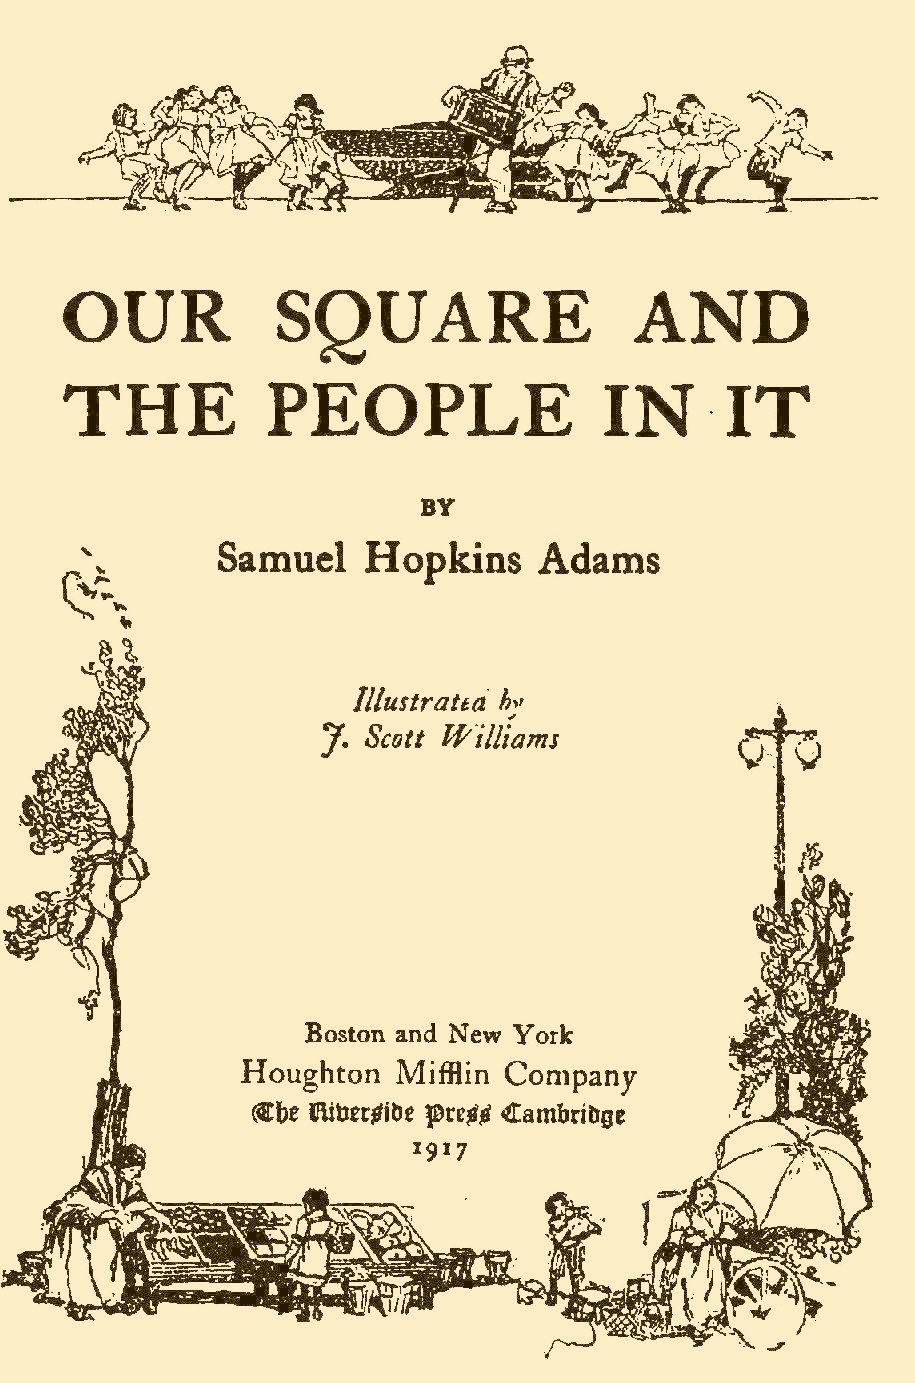 Our Square and the People in It, by Samuel Hopkins Adams